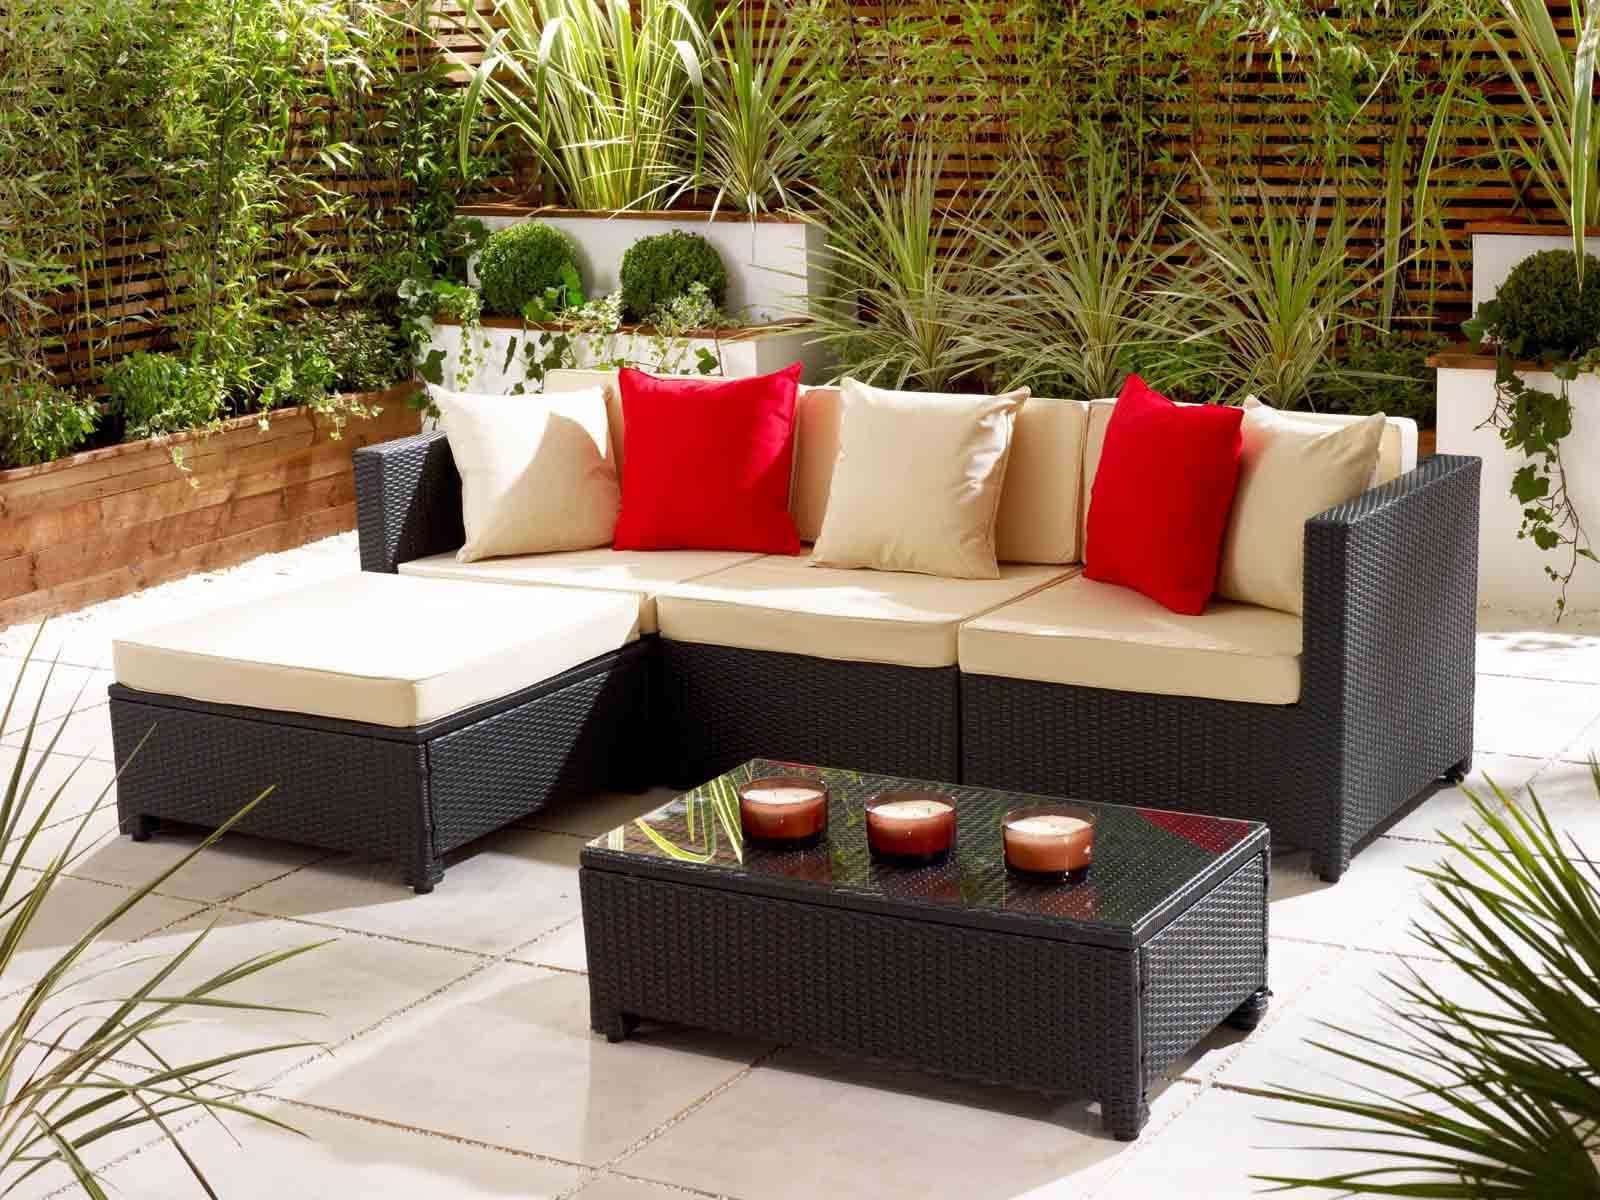 Full Size of Patio Furniture:all Weather Wicker Furniture Best All Outdoor  Sets